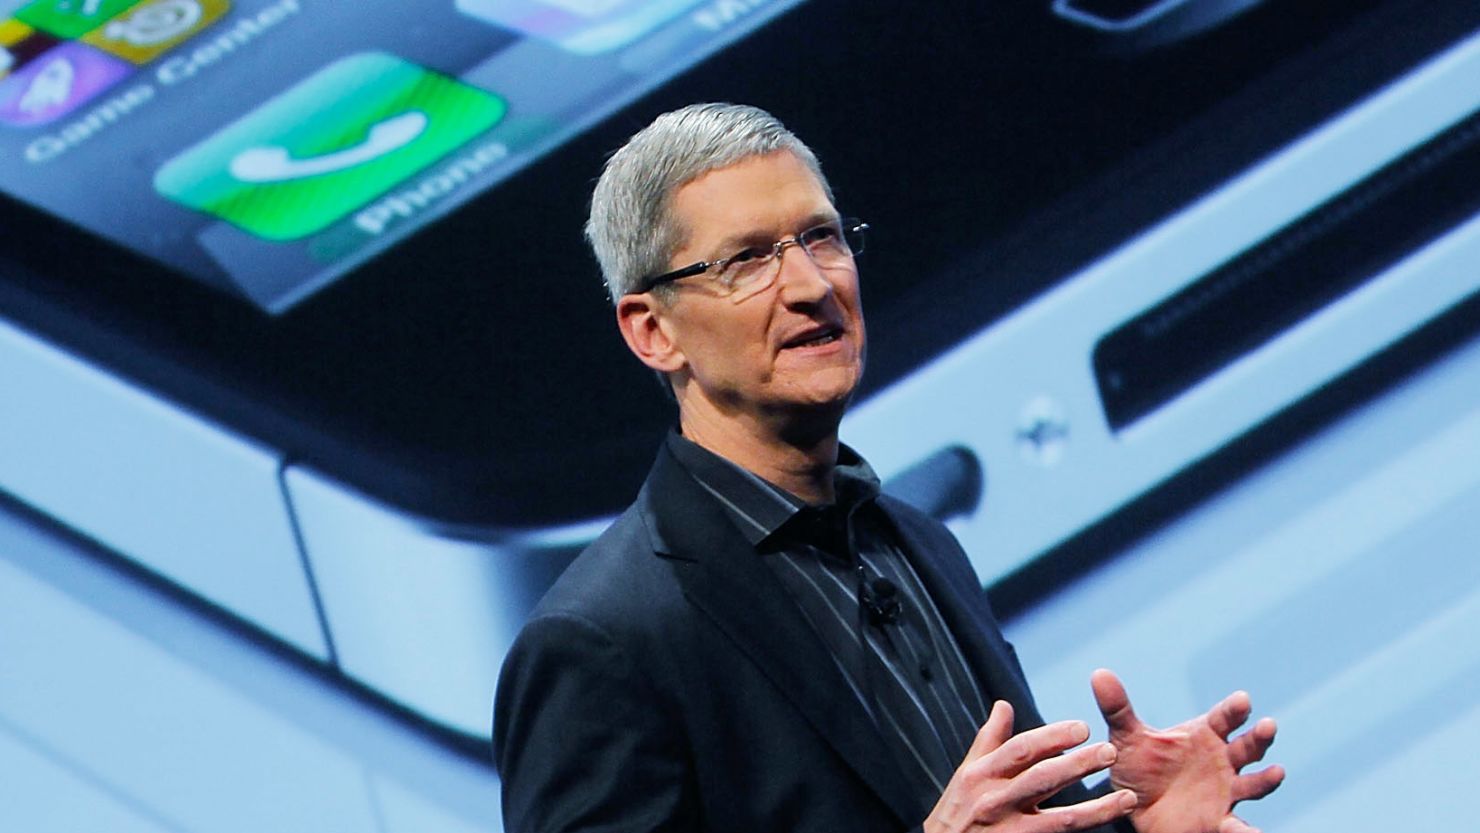 Apple CEO Tim Cook helps unveil the Verizon iPhone in January in New York.